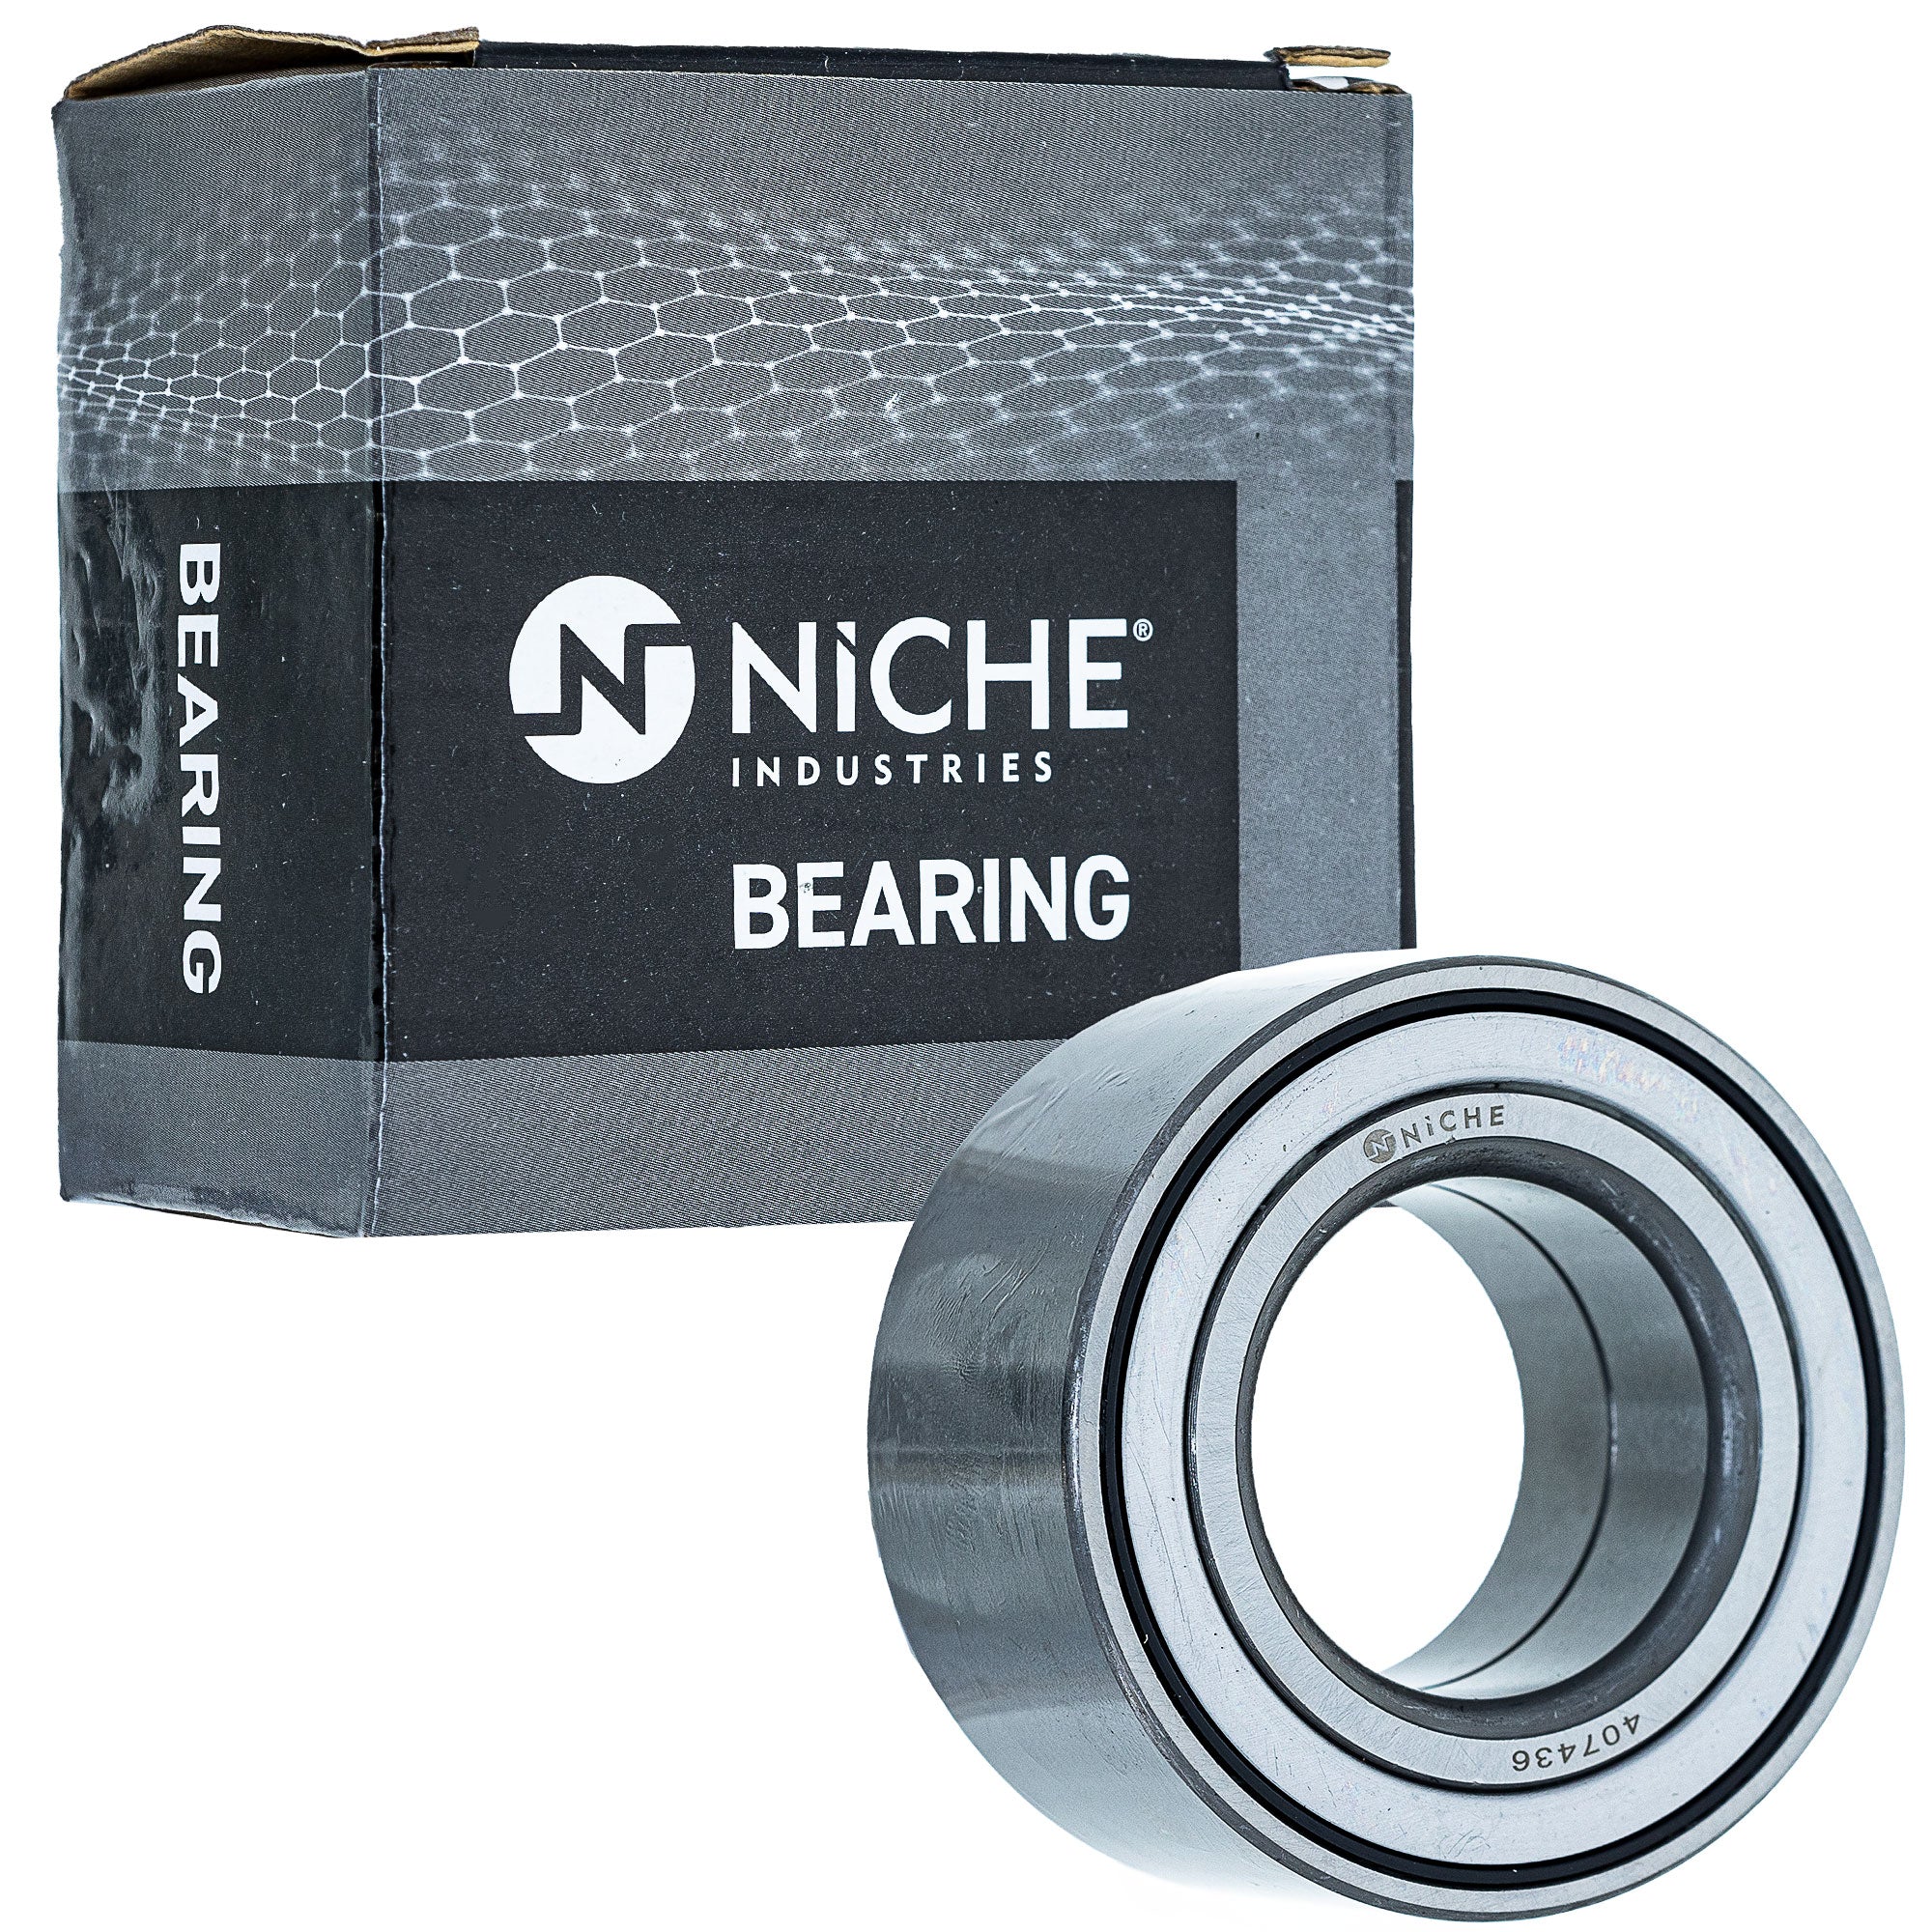 NICHE 519-CBB2291R Bearing for zOTHER